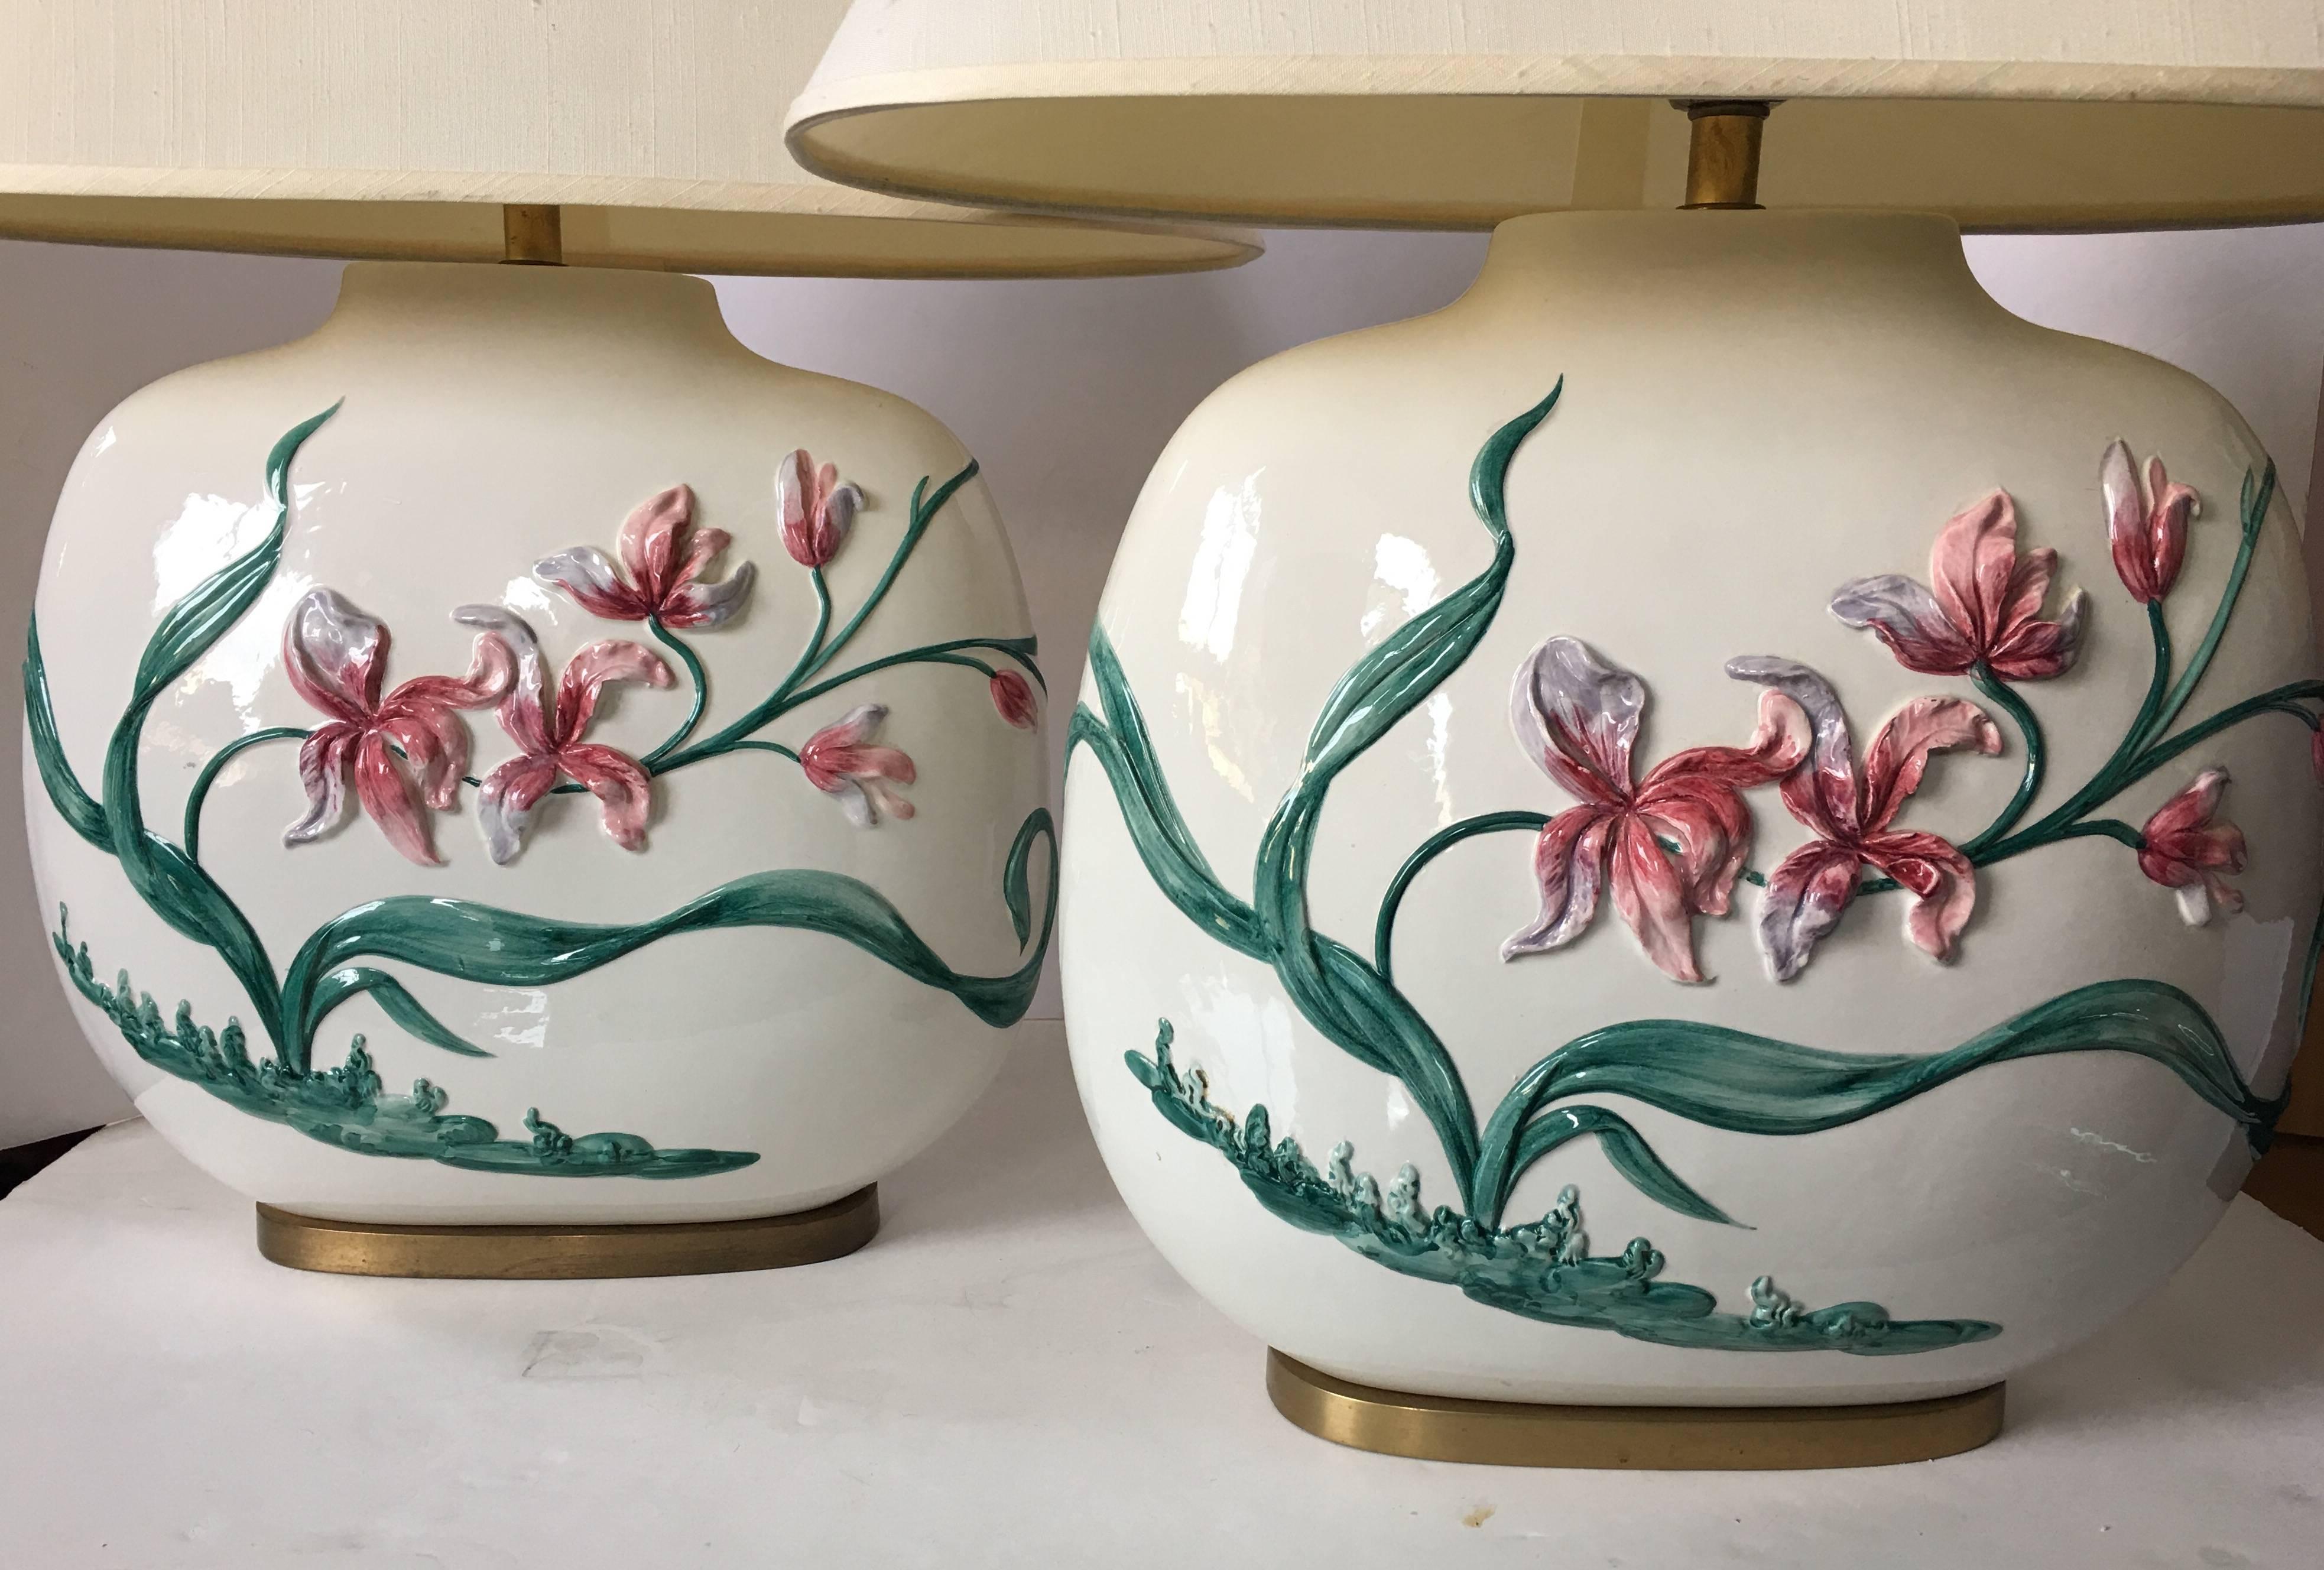 Beautiful pair of chinoiserie style hand-painted floral motif table lamps by Chapman. Oval shaped glazed ceramic bodies feature a dimensional two-sided flowing floral design and brass bases. Original oval shaped lamp shades included. Origonal